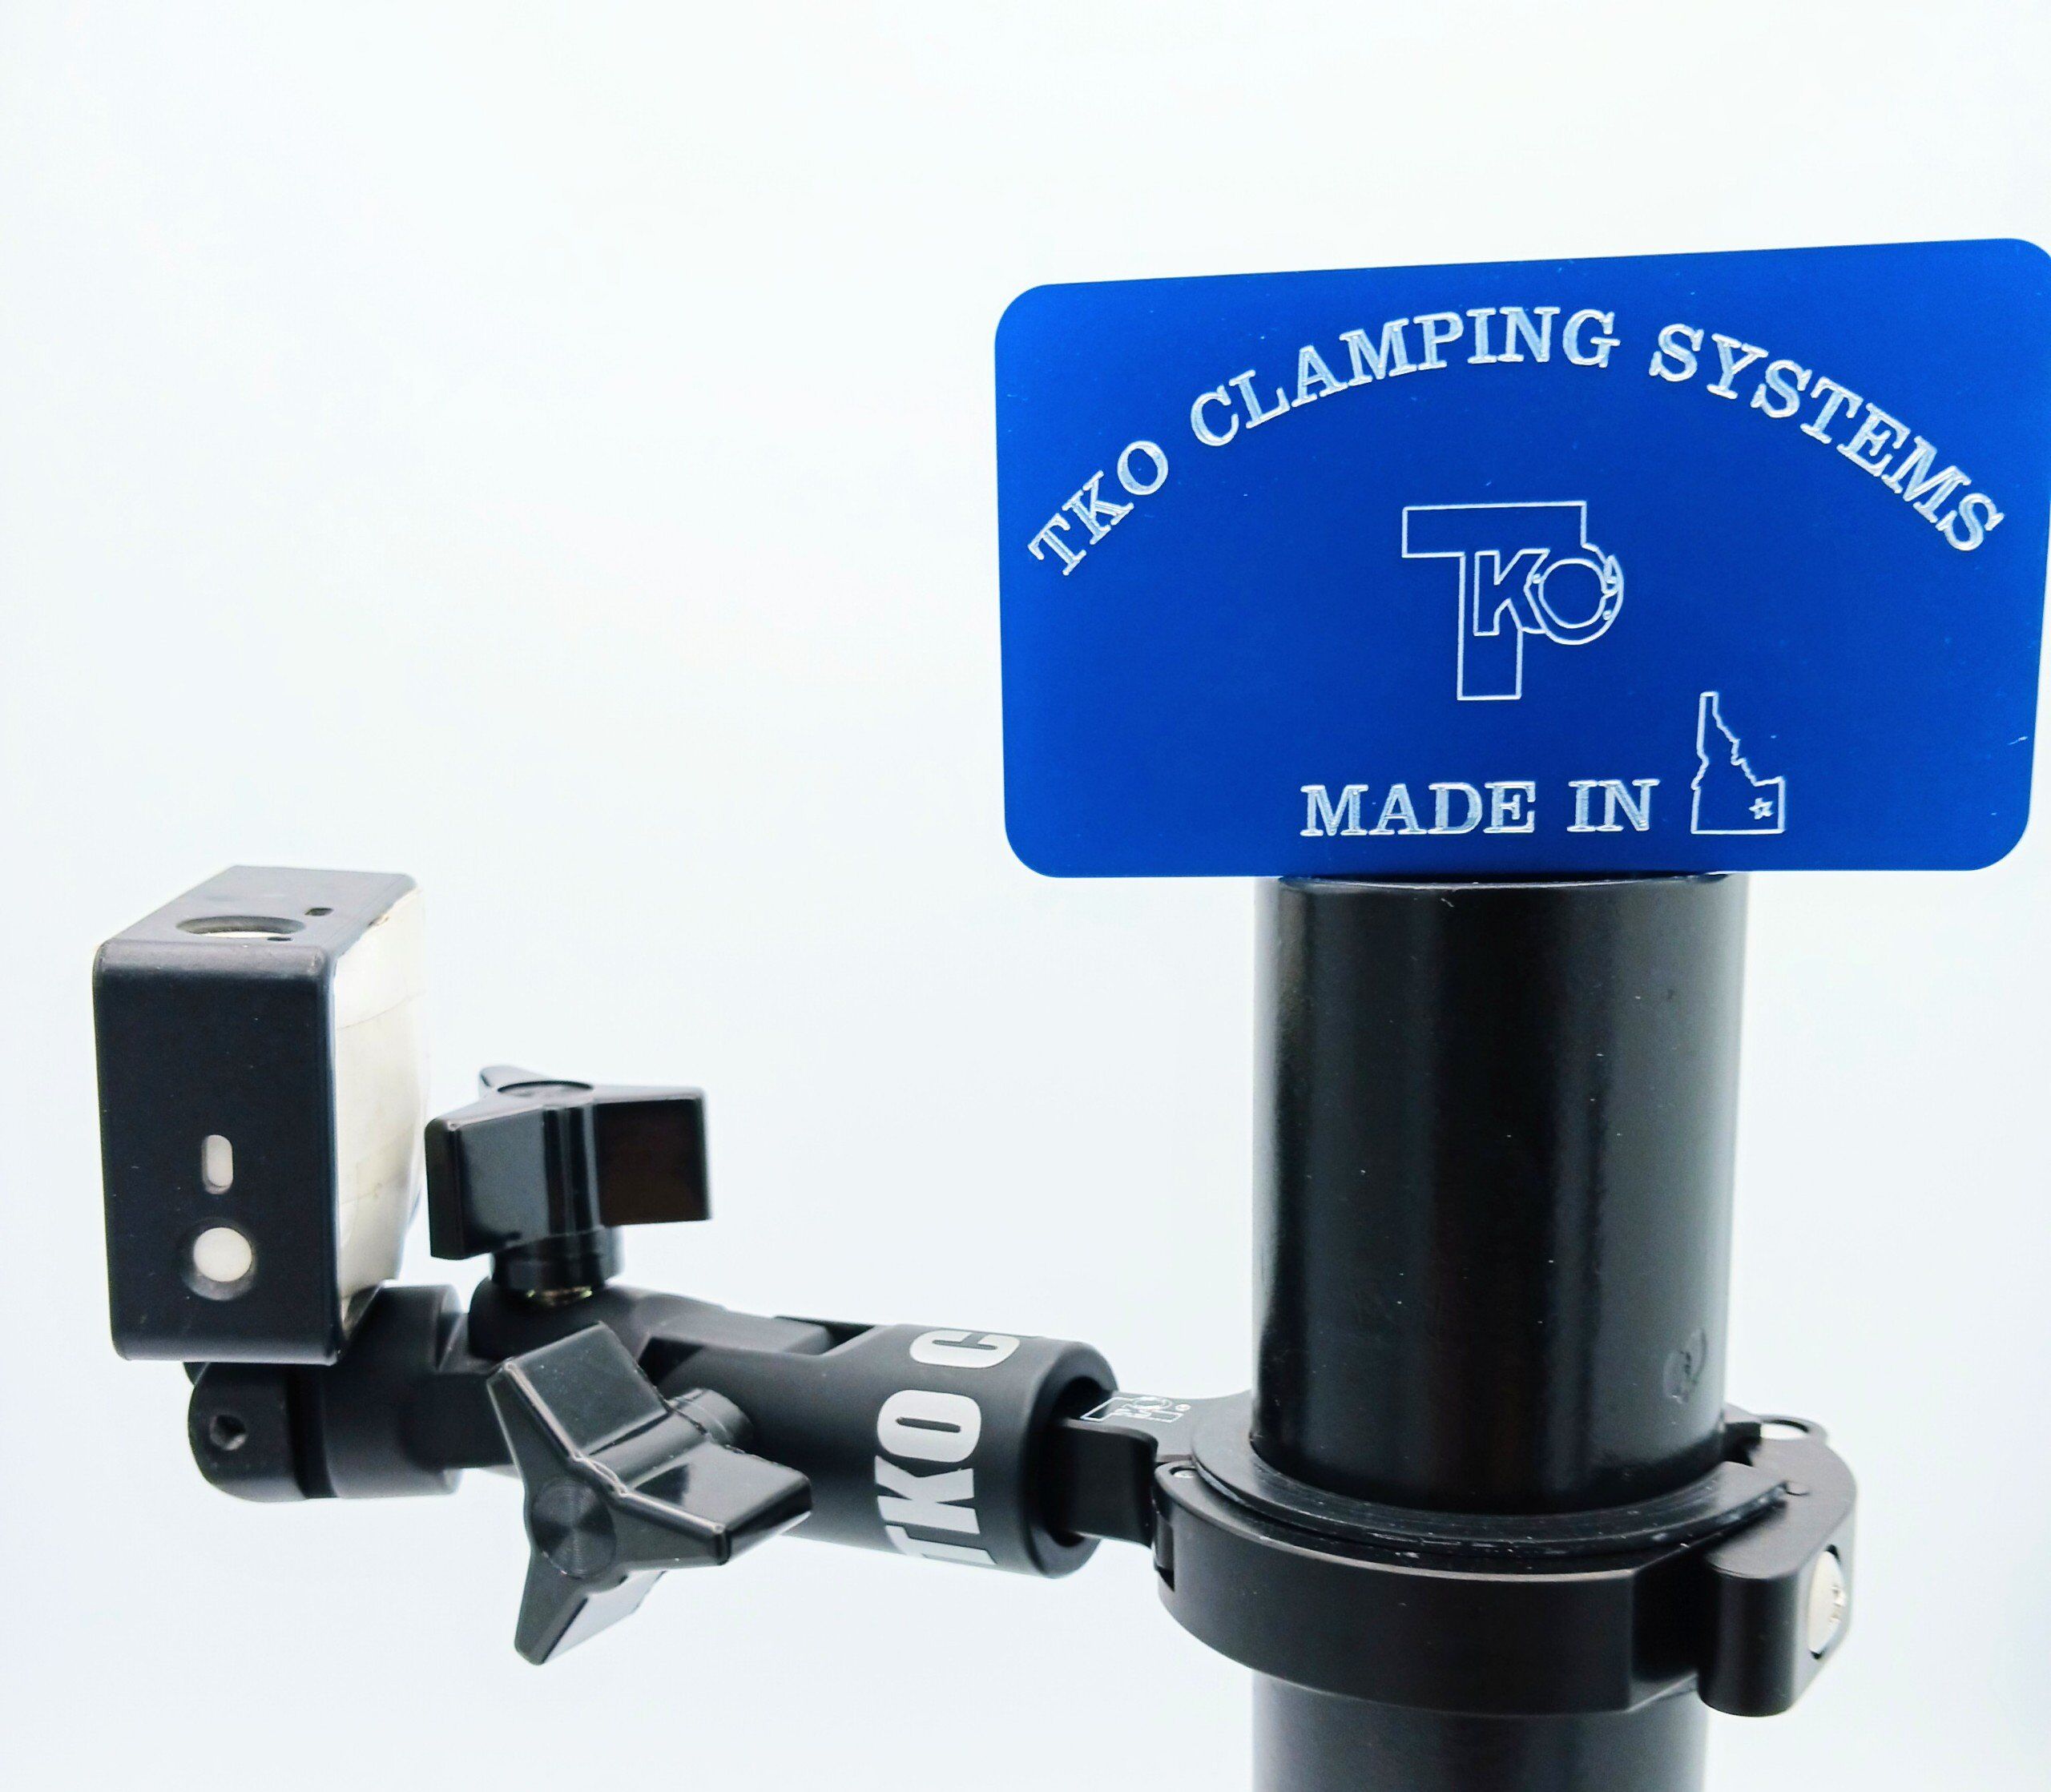 Why Buy TKO Clamps?  TKO Clamping Systems